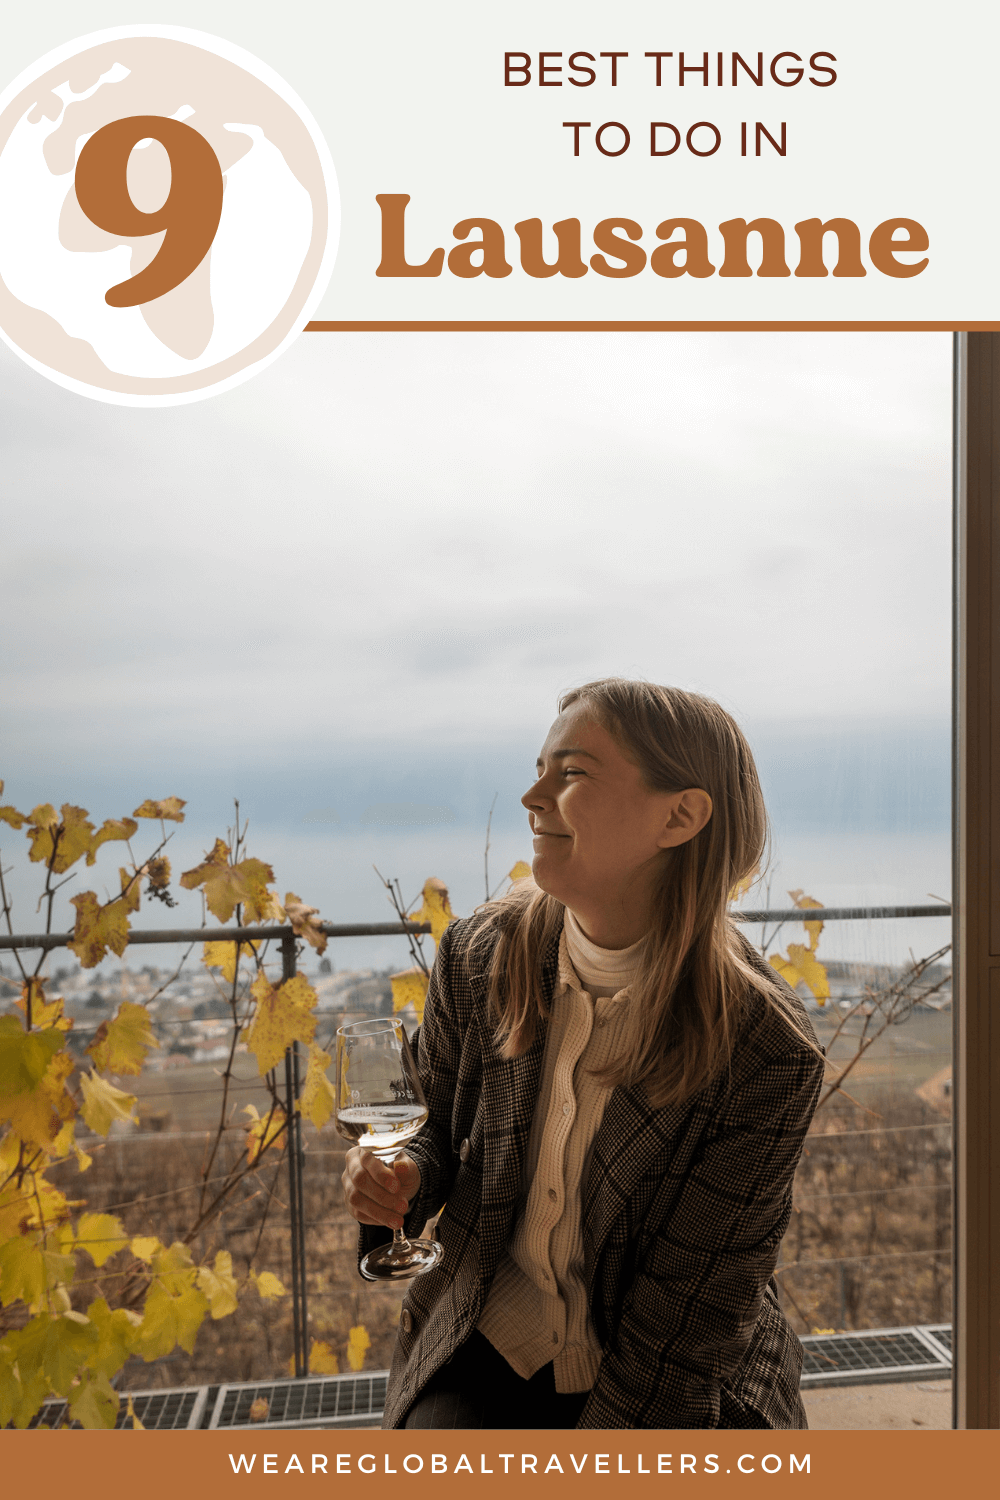 The best things to do in Lausanne